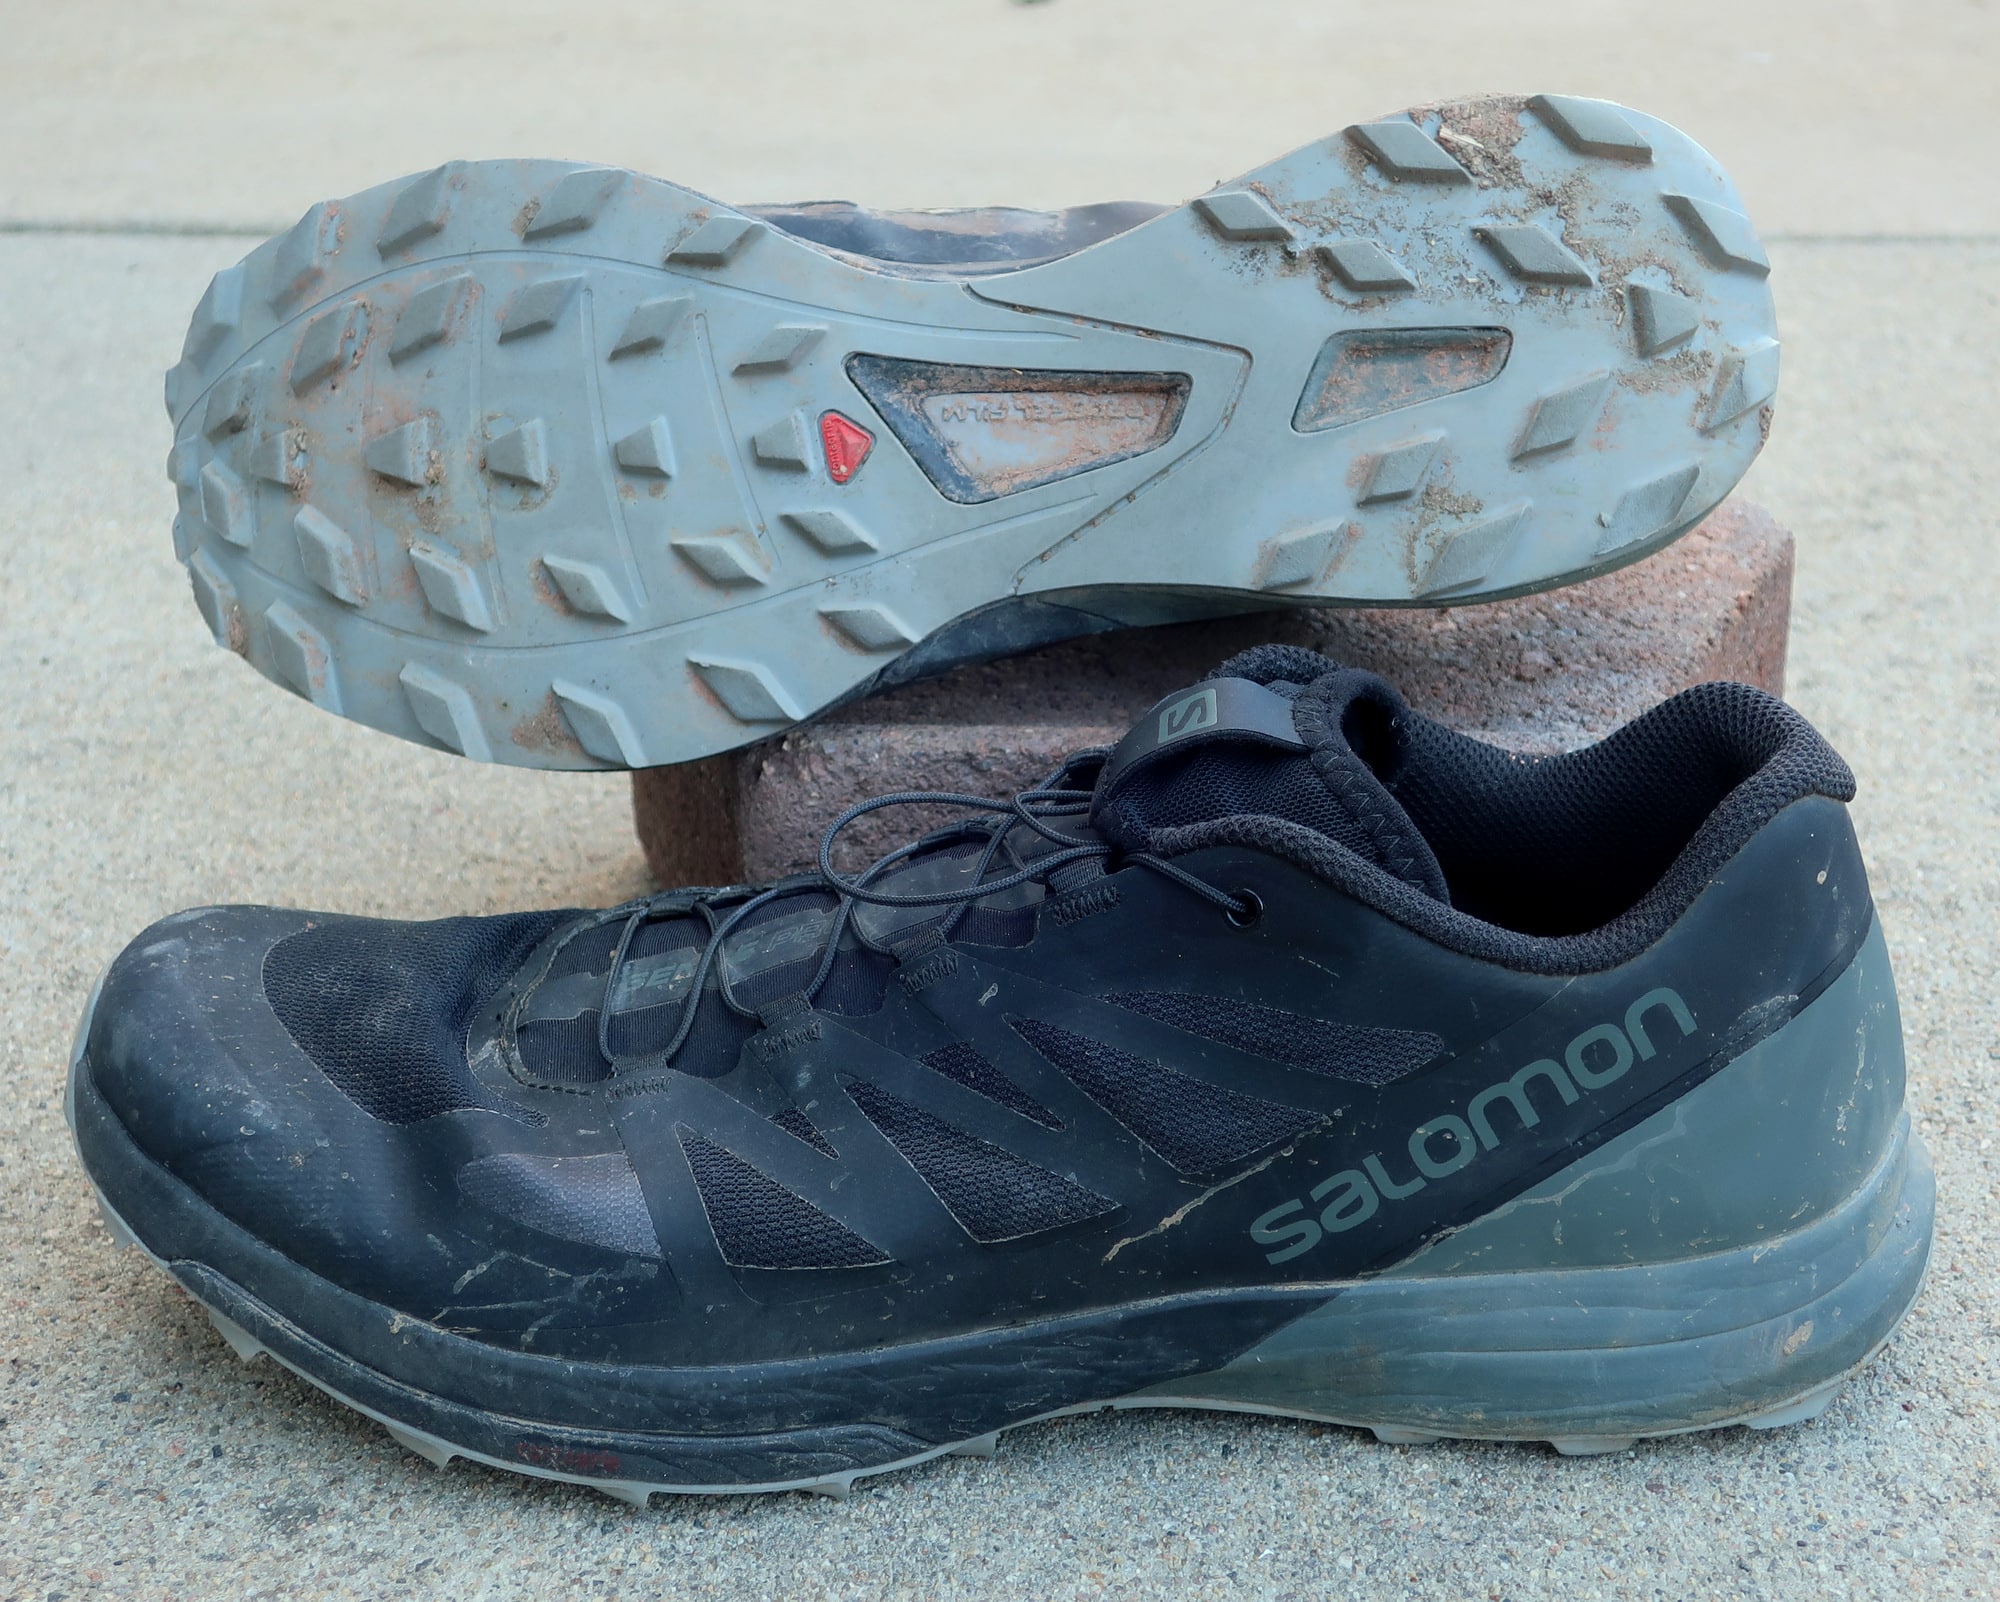 disloyalty Than Unsuitable Review: Salomon Sense Pro 3 || Smooth speedster for soft ground